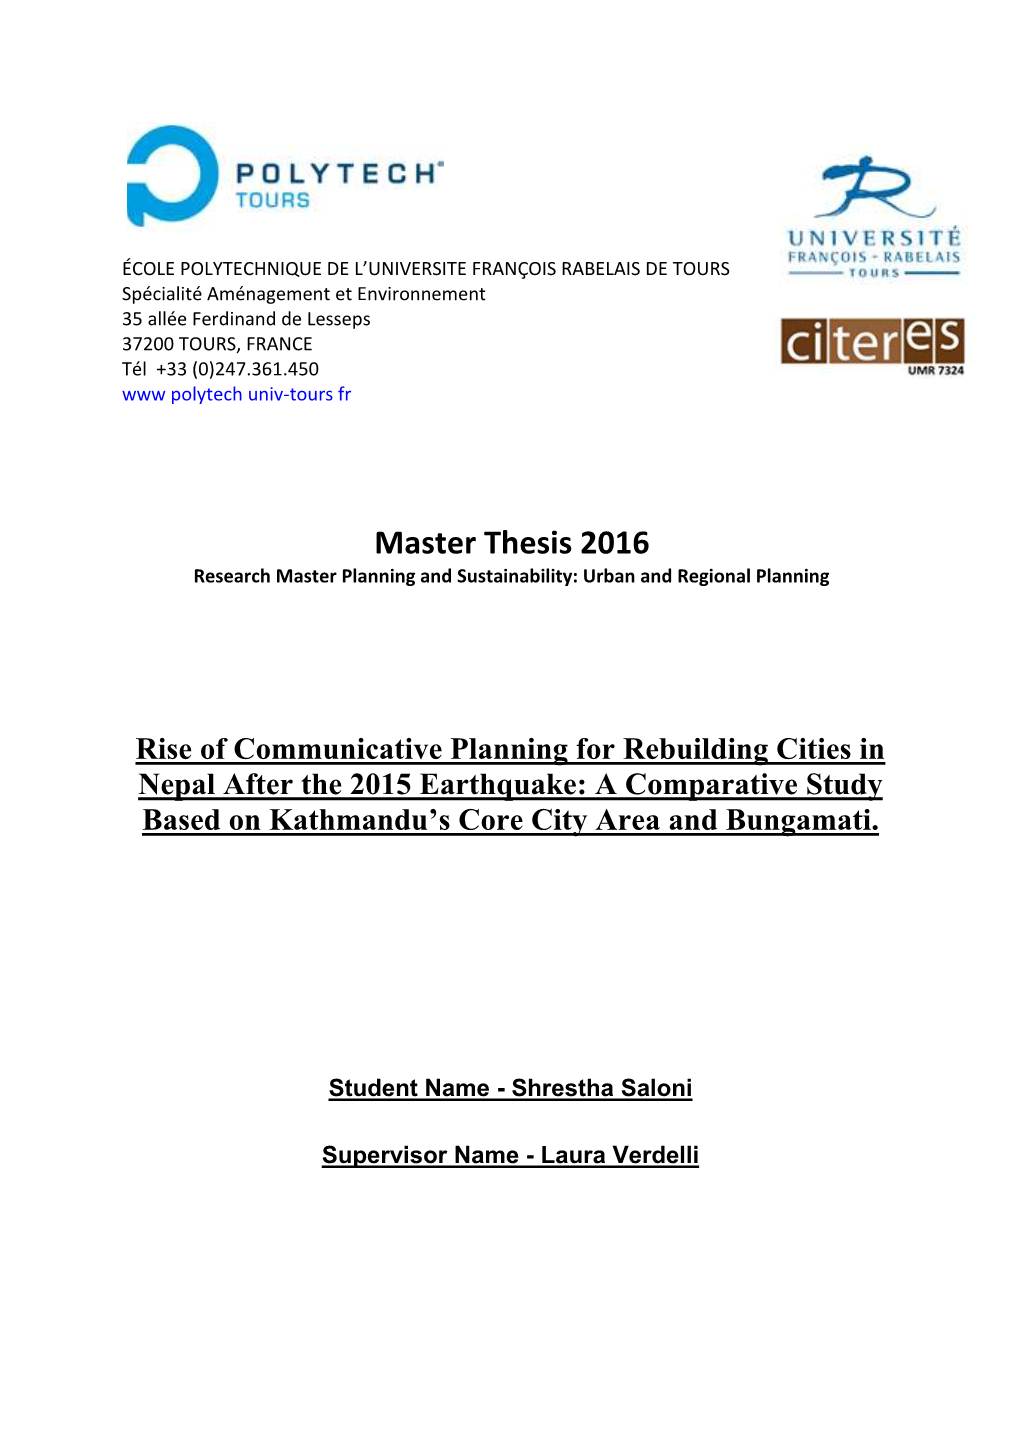 Master Thesis 2016 Research Master Planning and Sustainability: Urban and Regional Planning